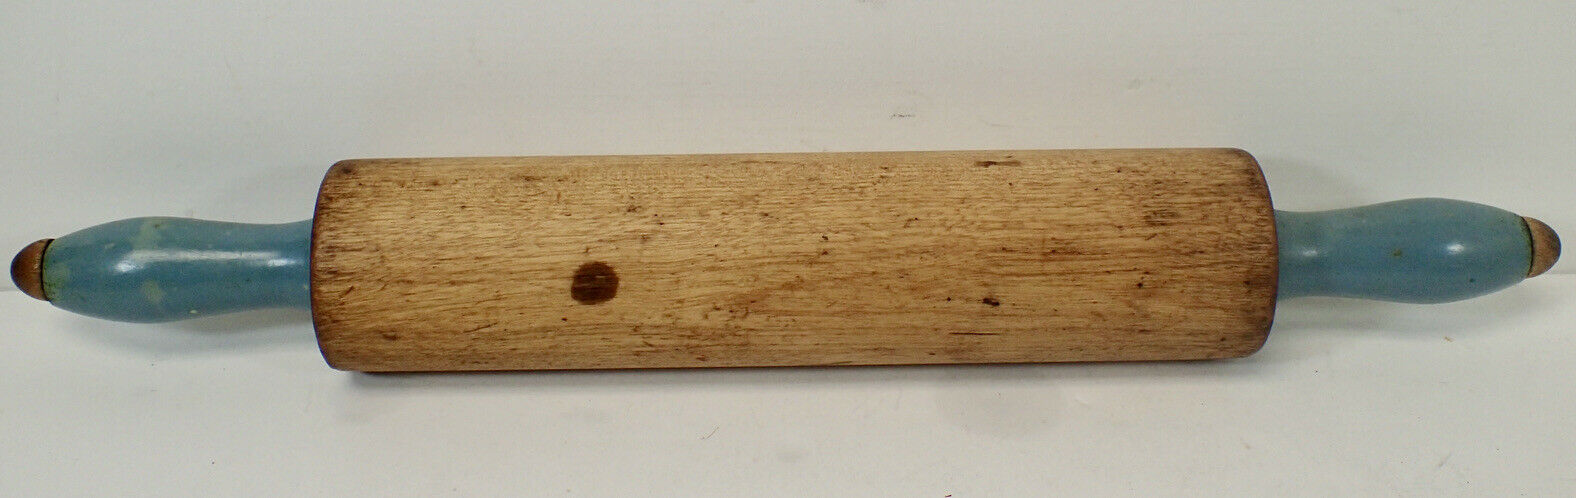 antique wooden rolling pin w/ blue handles 16 1/2 x 2 1/2